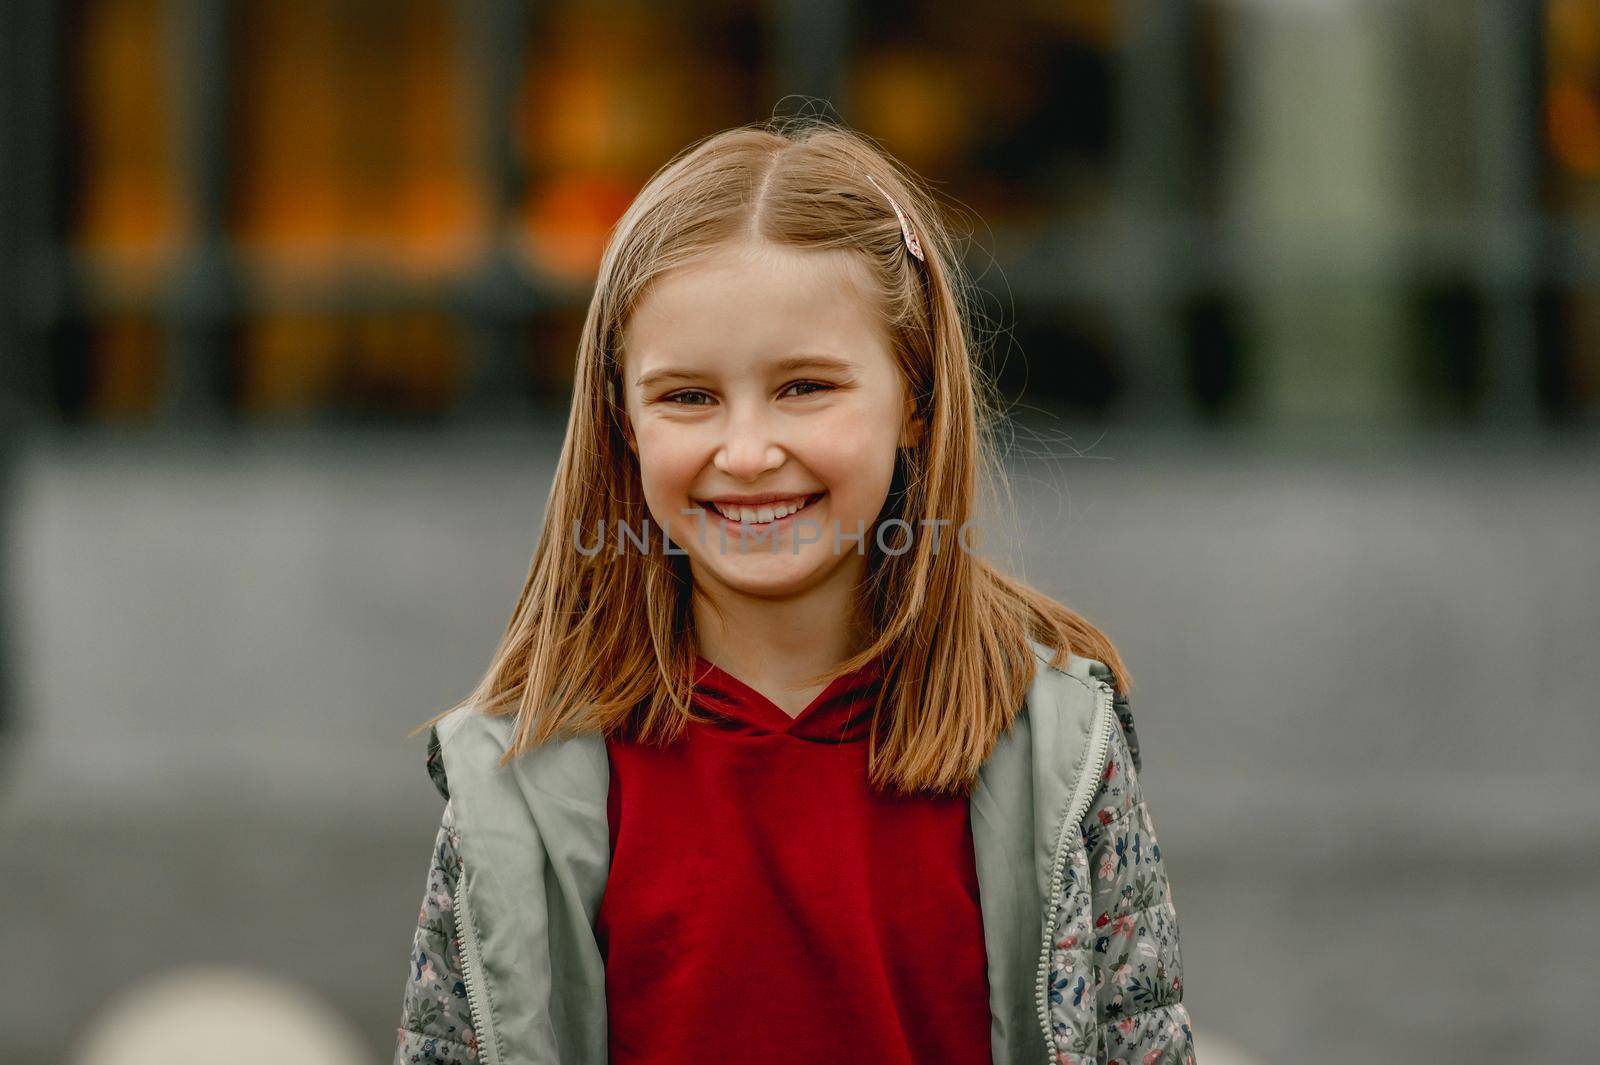 Pretty girl kid autumn portrait outdoors. Preteen female child looking at camera and smiling